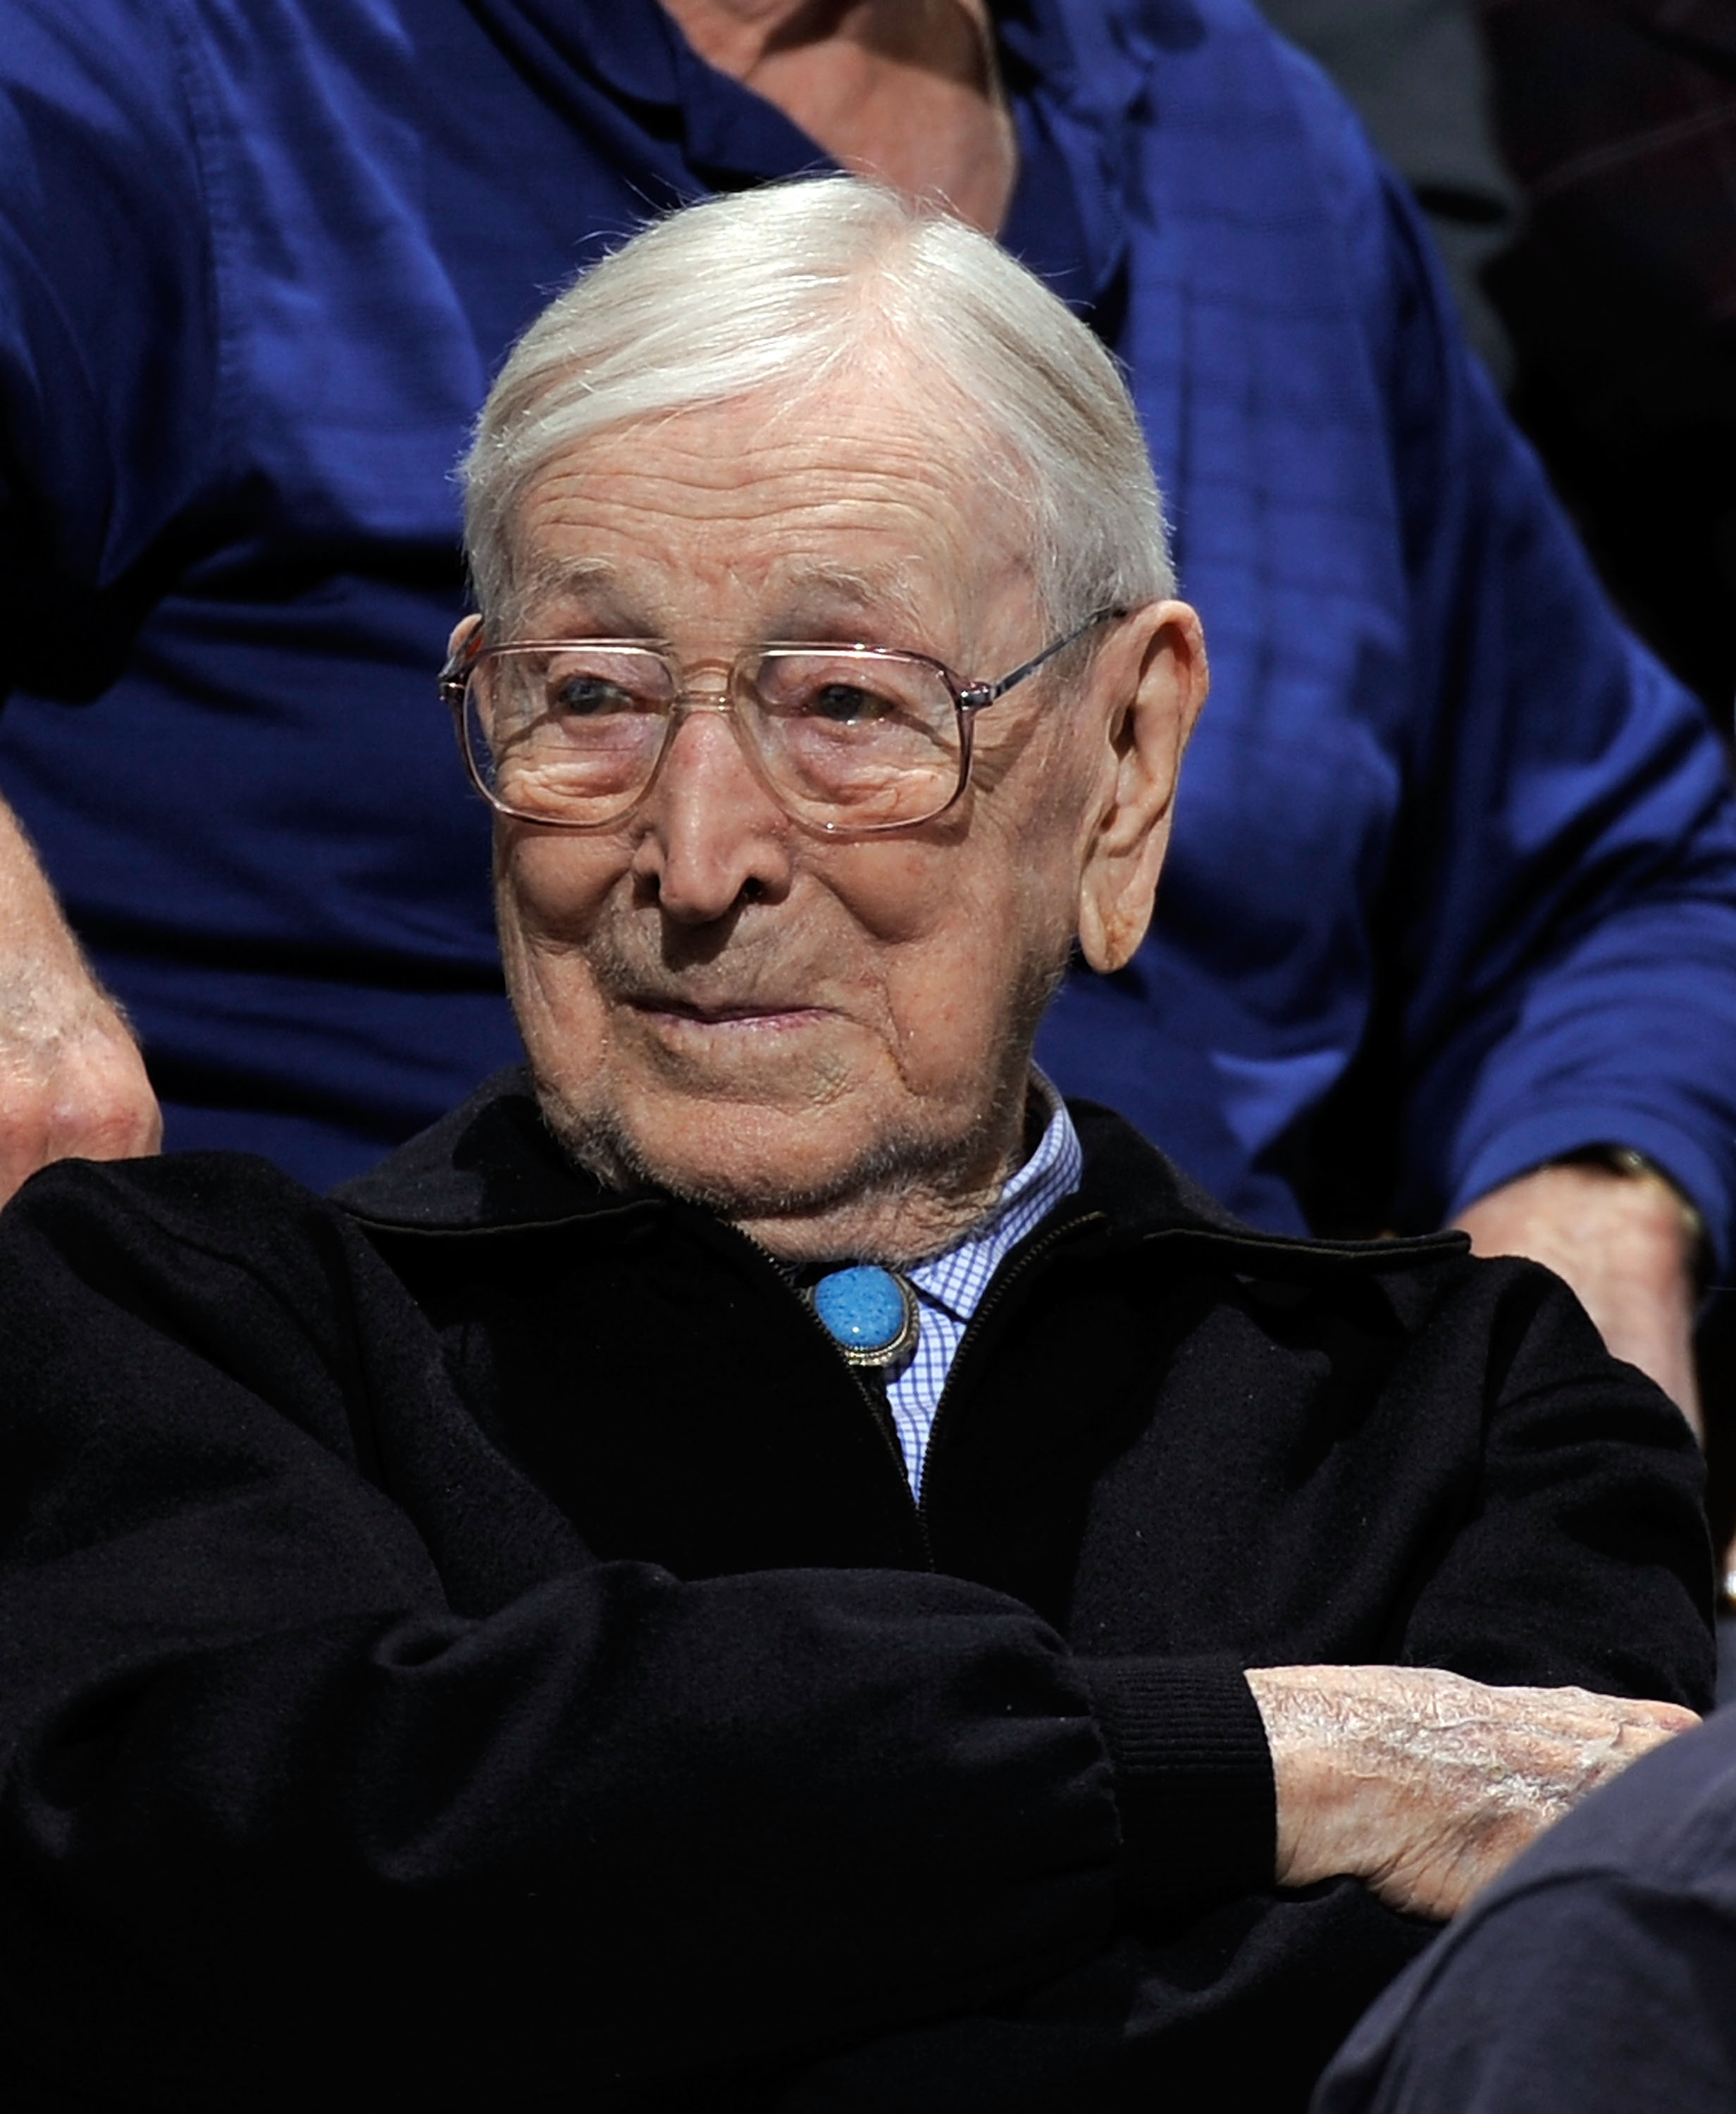 WESTWOOD, CA - JANUARY 29:  Former coach John Wooden of the UCLA Bruins watches as the Bruins take on the University of California Golden Bears at Pauley Pavilion January 29, 2009 in Westwood, California. UCLA won, 81-66.  (Photo by Kevork Djansezian/Gett